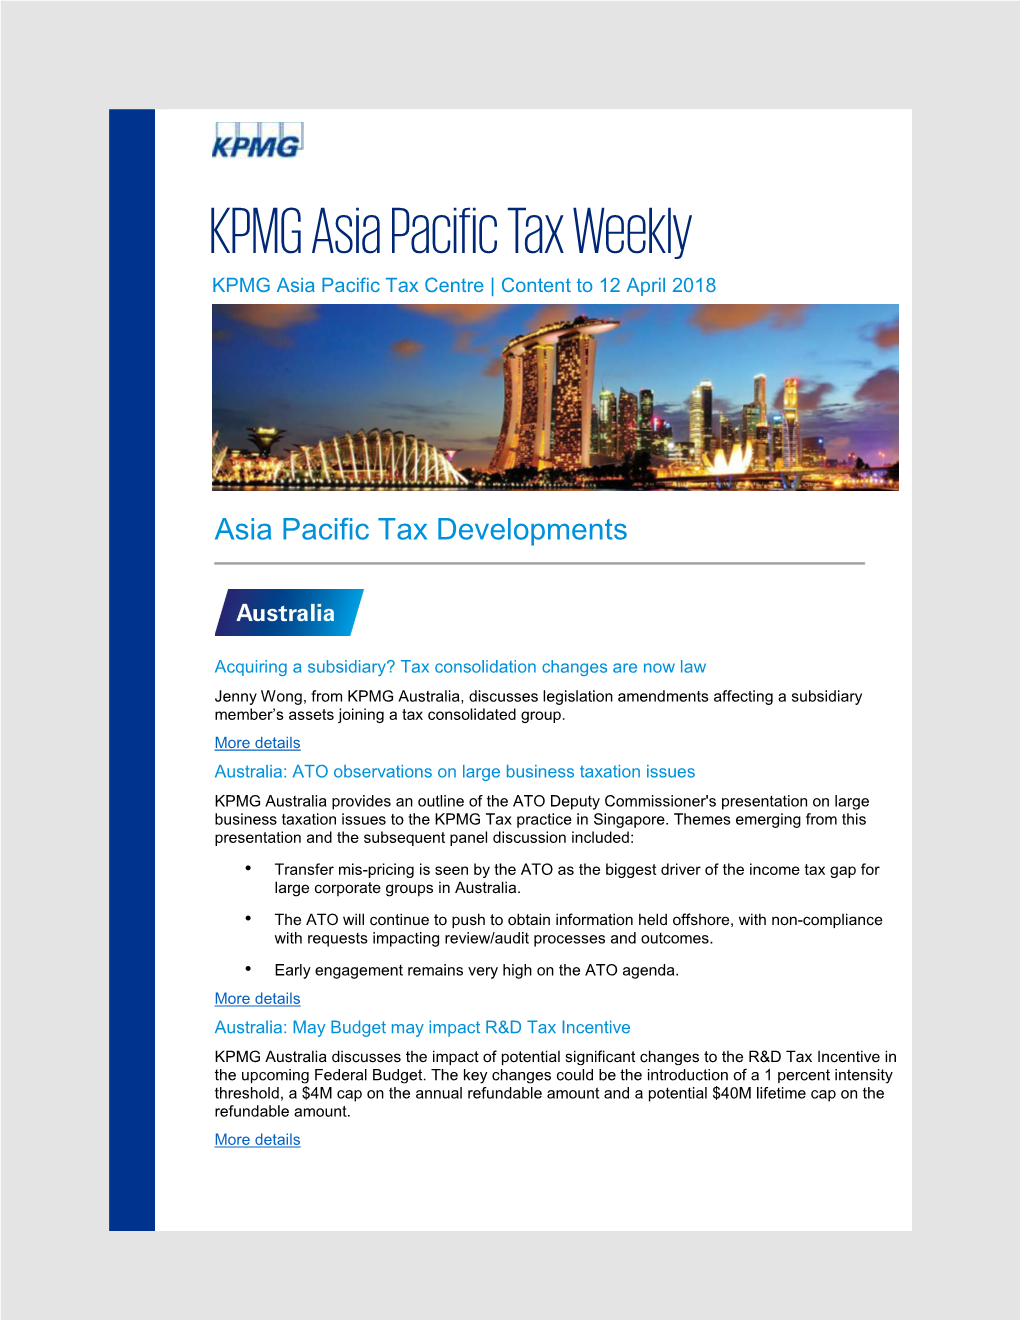 KPMG Asia Pacific Tax Weekly